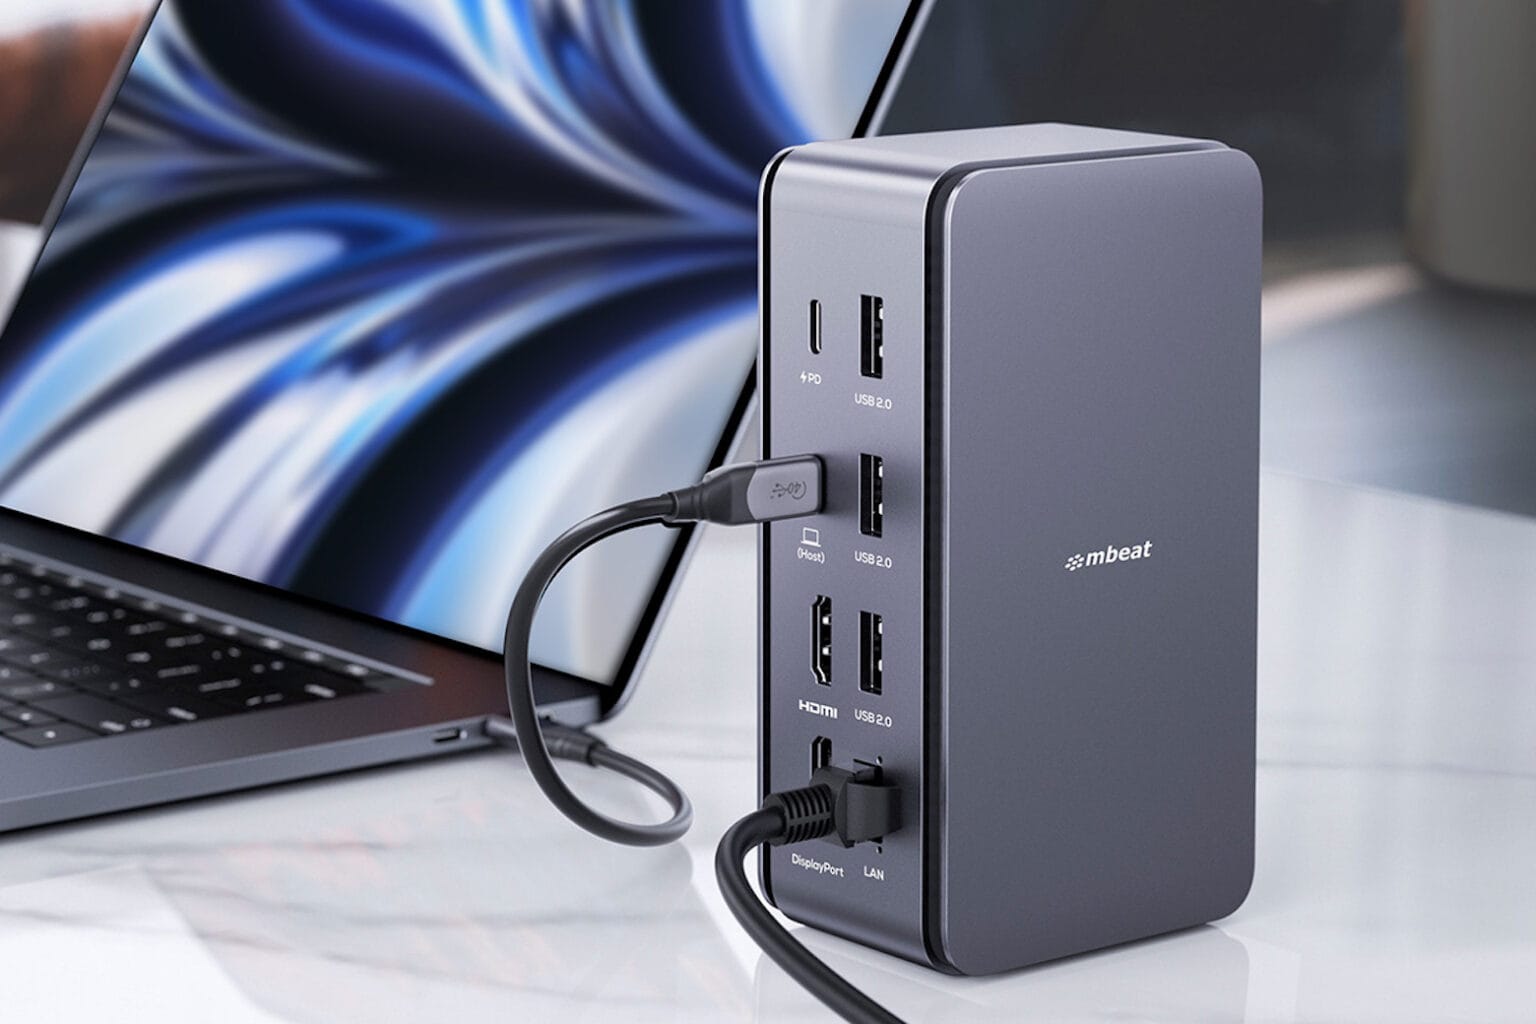 Stay connected to several devices with a single power source for 20% off.